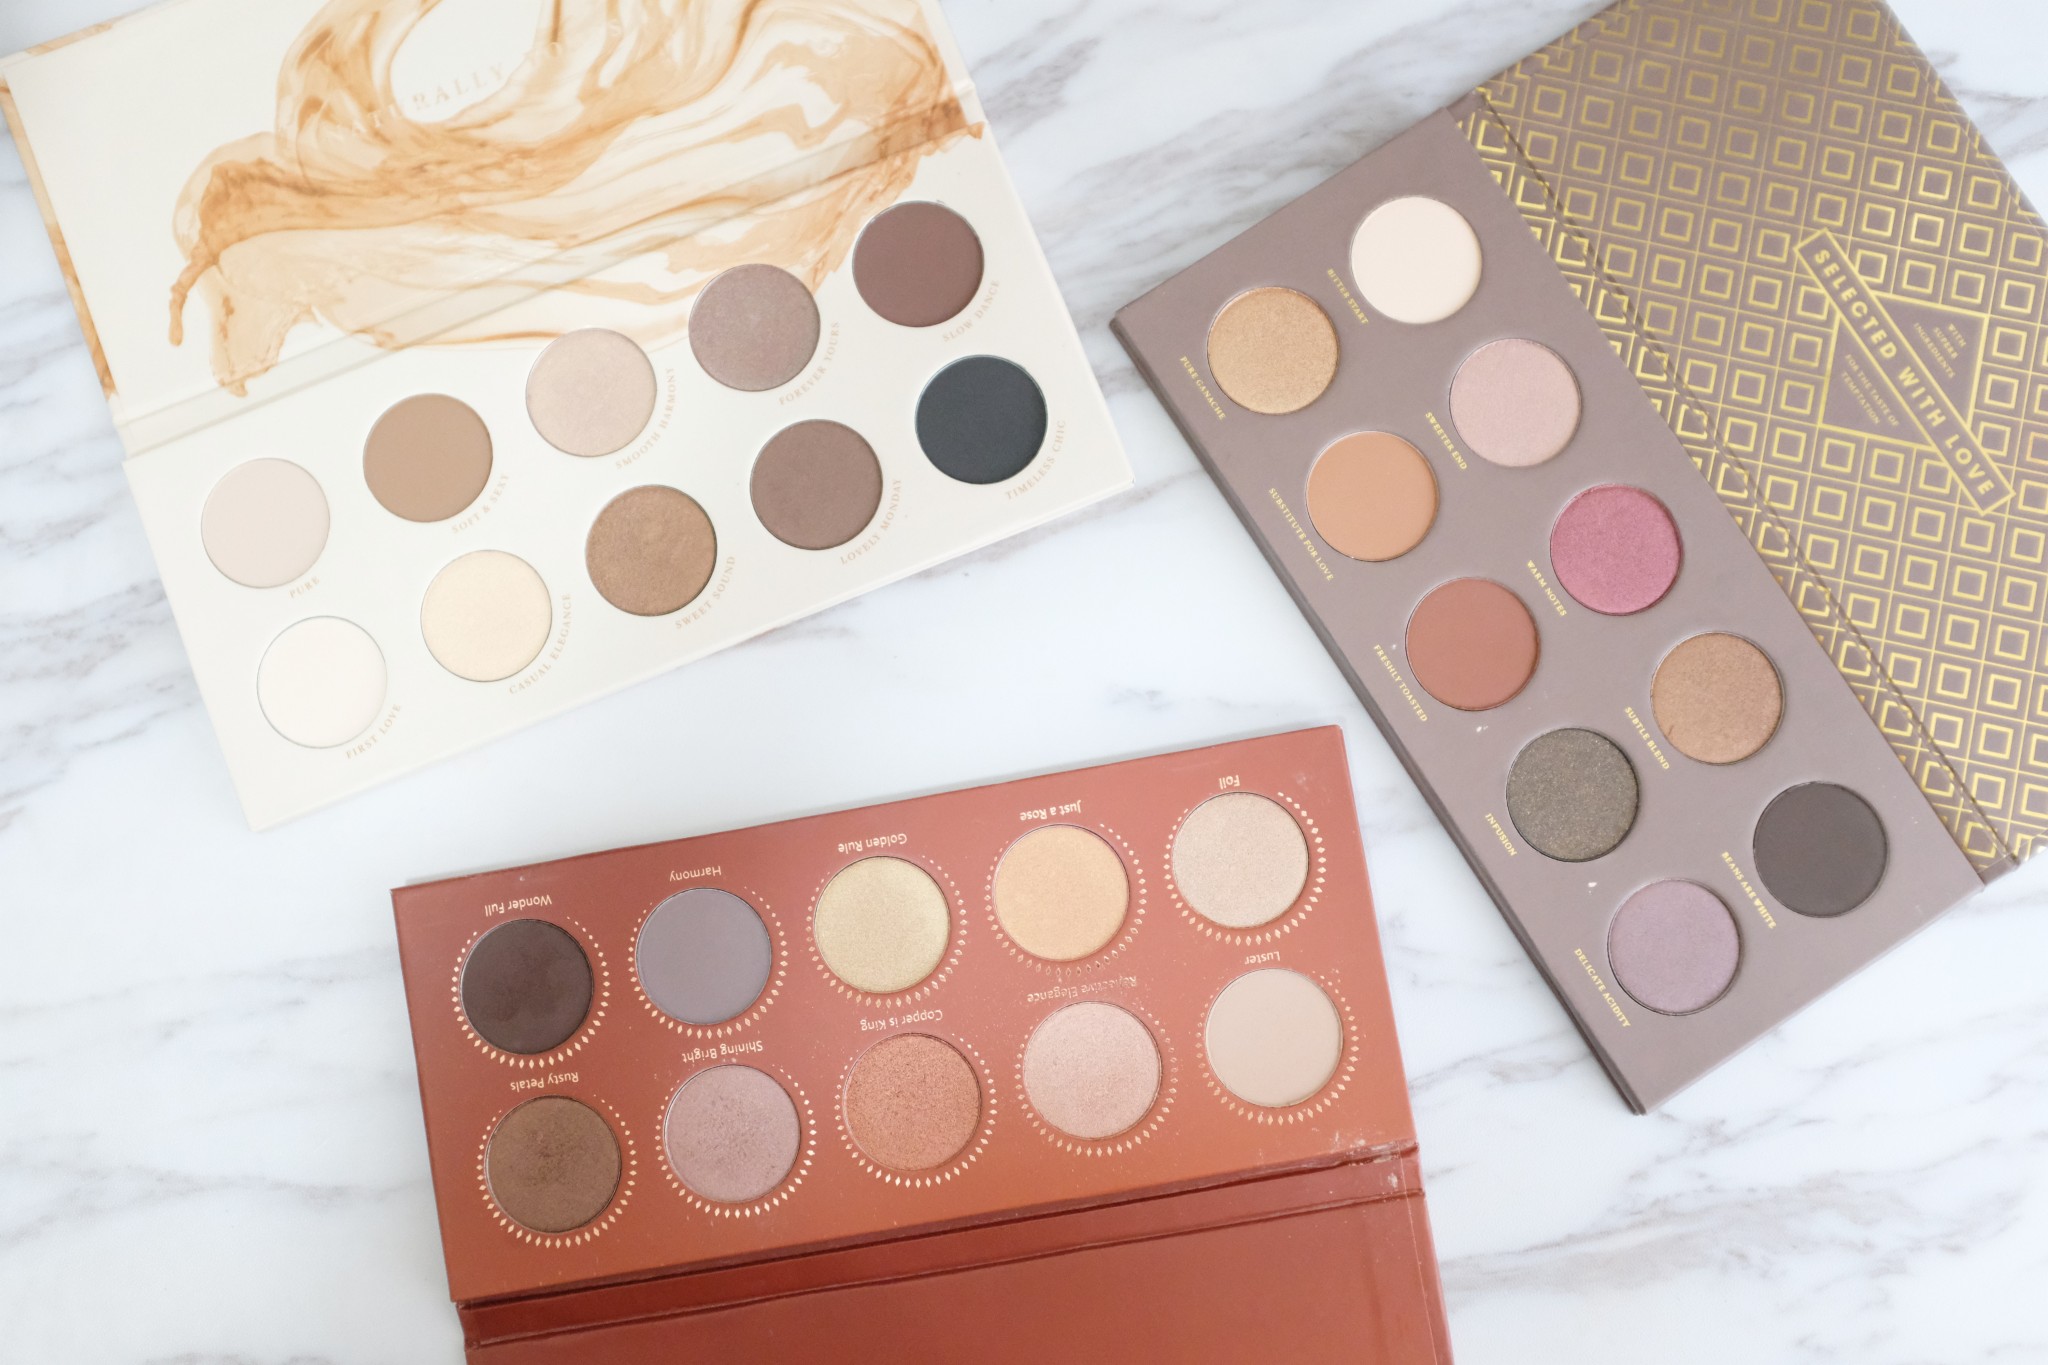 Zoeva Palettes – Naturally Yours, Cocoa Blend and Rose Golden